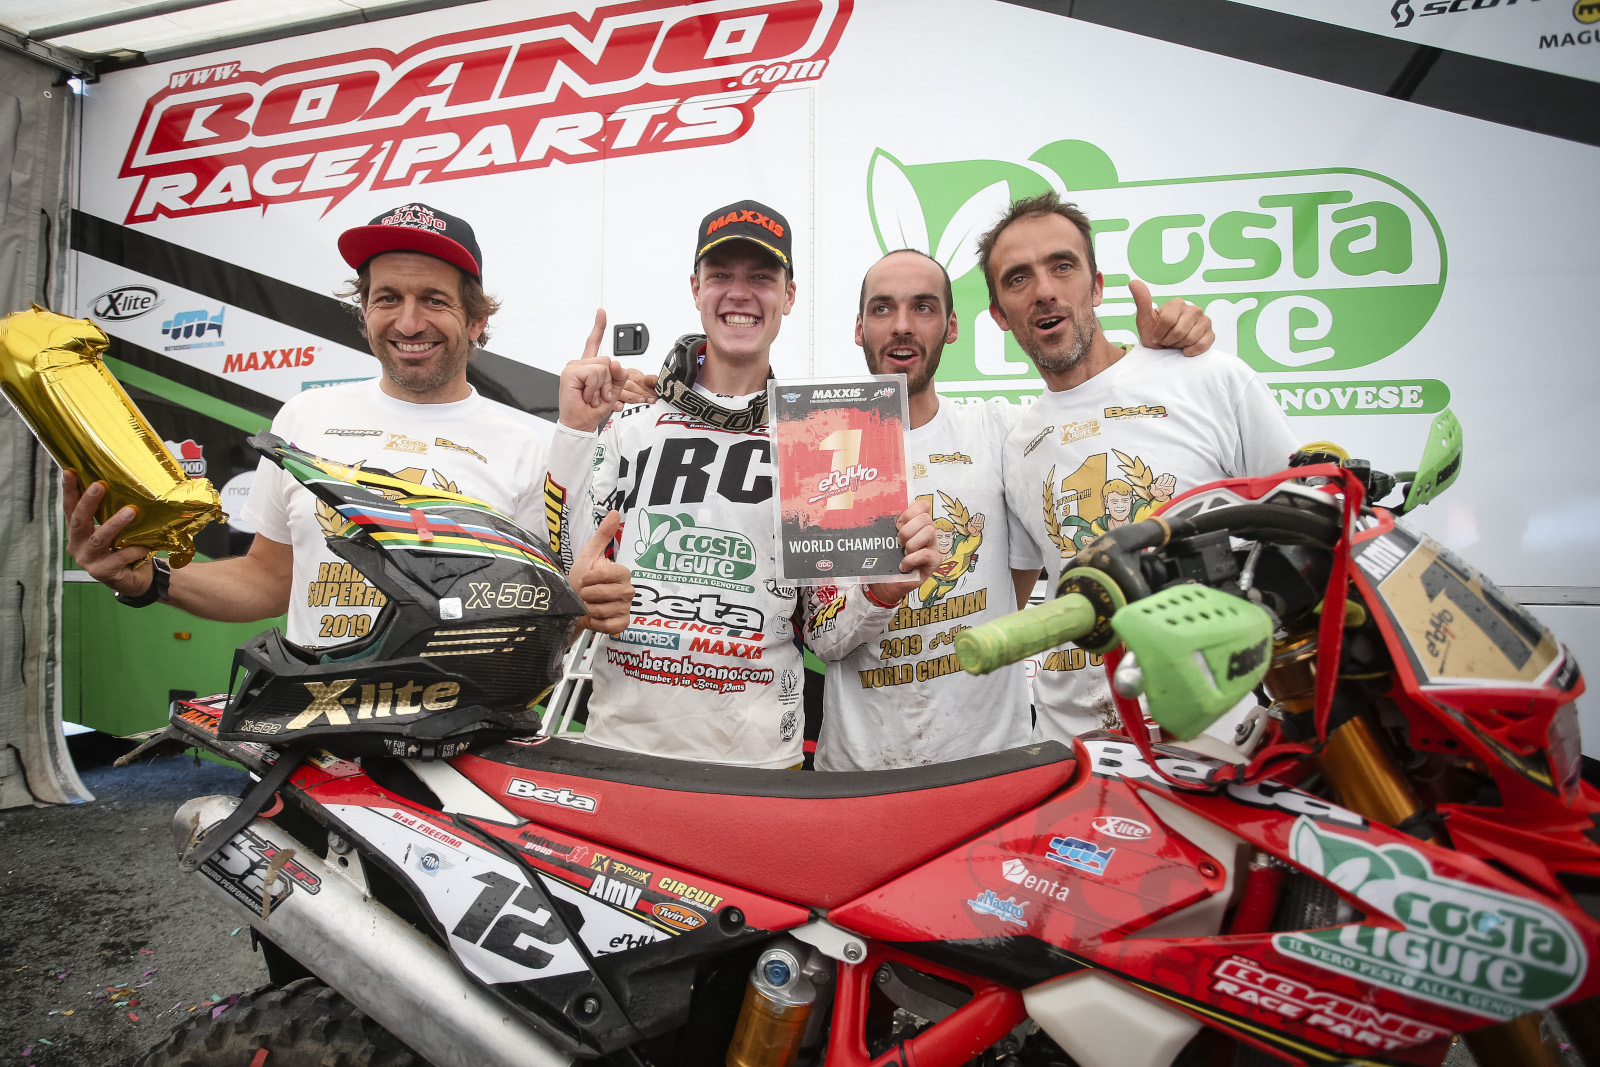 Results feed: Czech EnduroGP 2019 Day 2 – Brad Freeman takes victory and E1 world title  